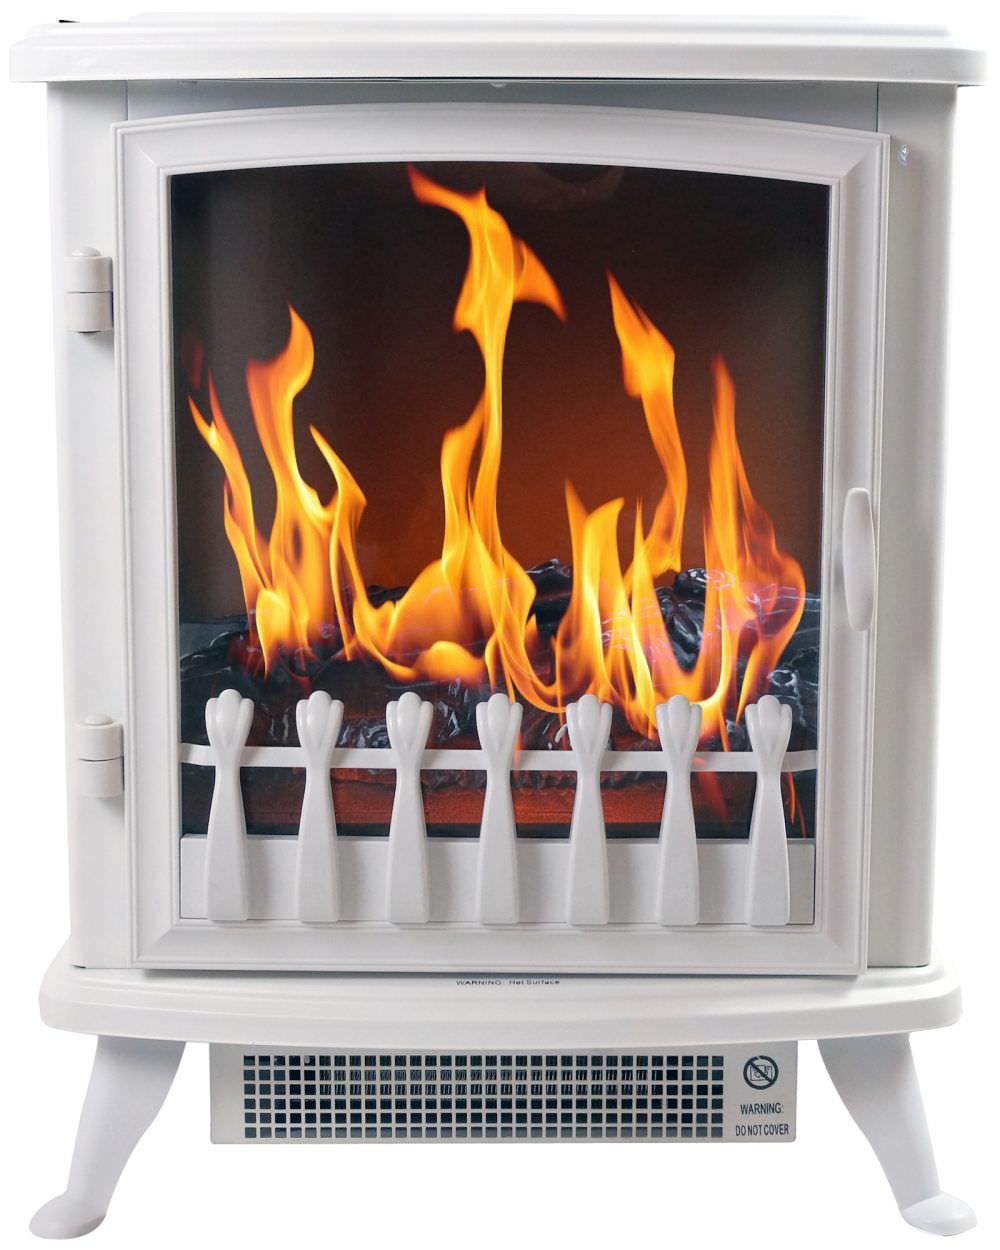 Portable Indoor Fireplace Lovely Decorative Fireplace Fire Glass White 3d Flame Effect